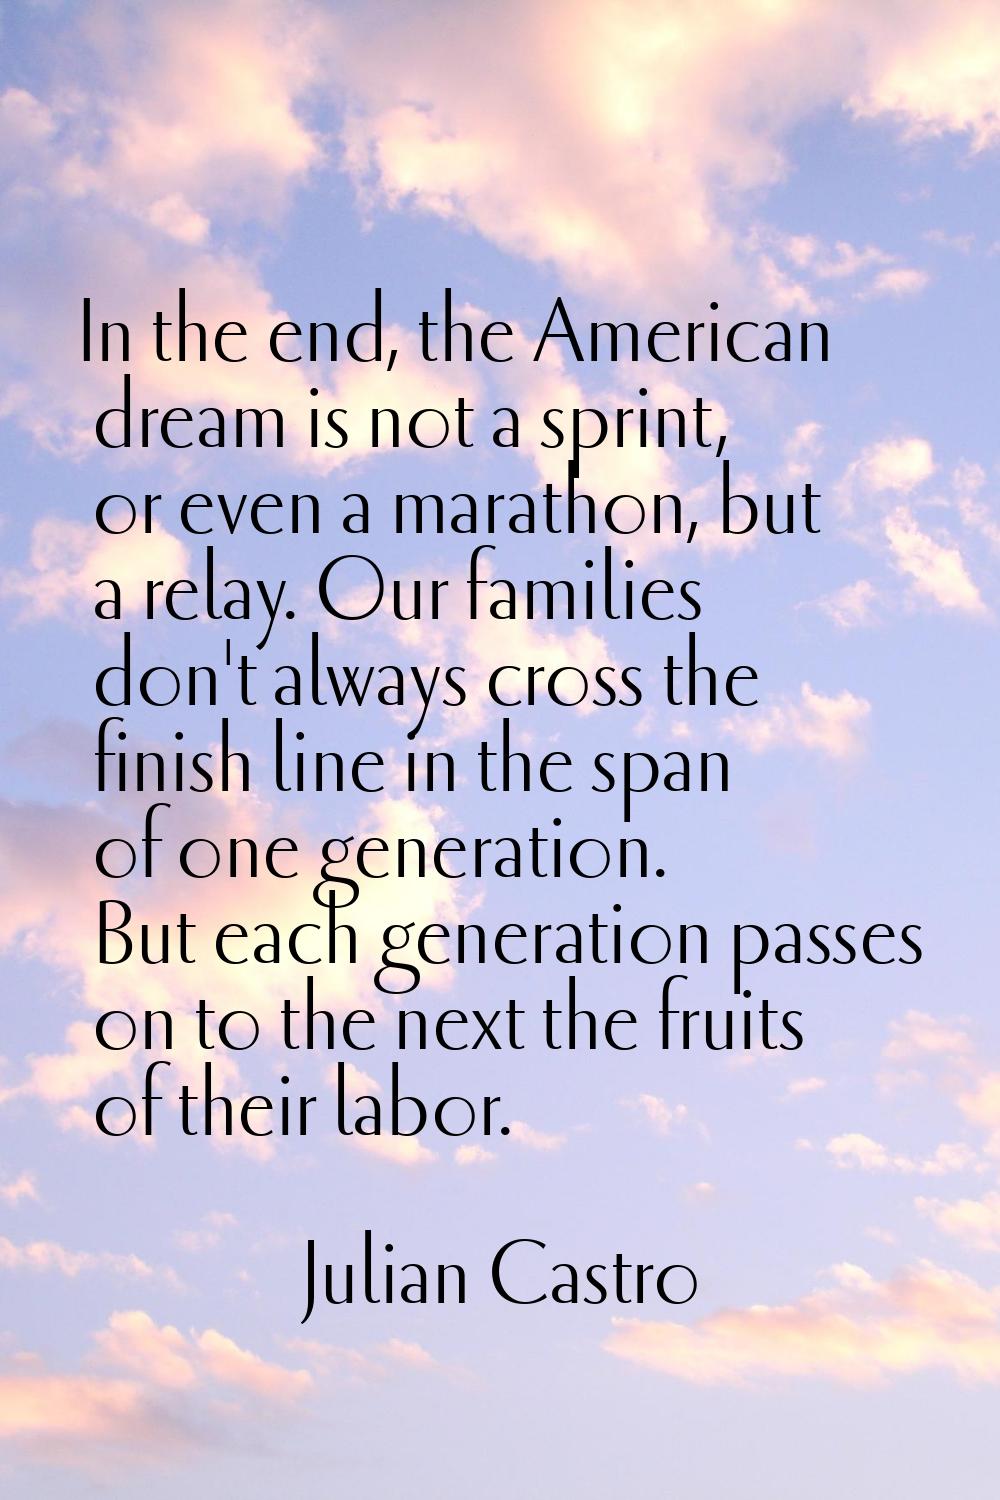 In the end, the American dream is not a sprint, or even a marathon, but a relay. Our families don't